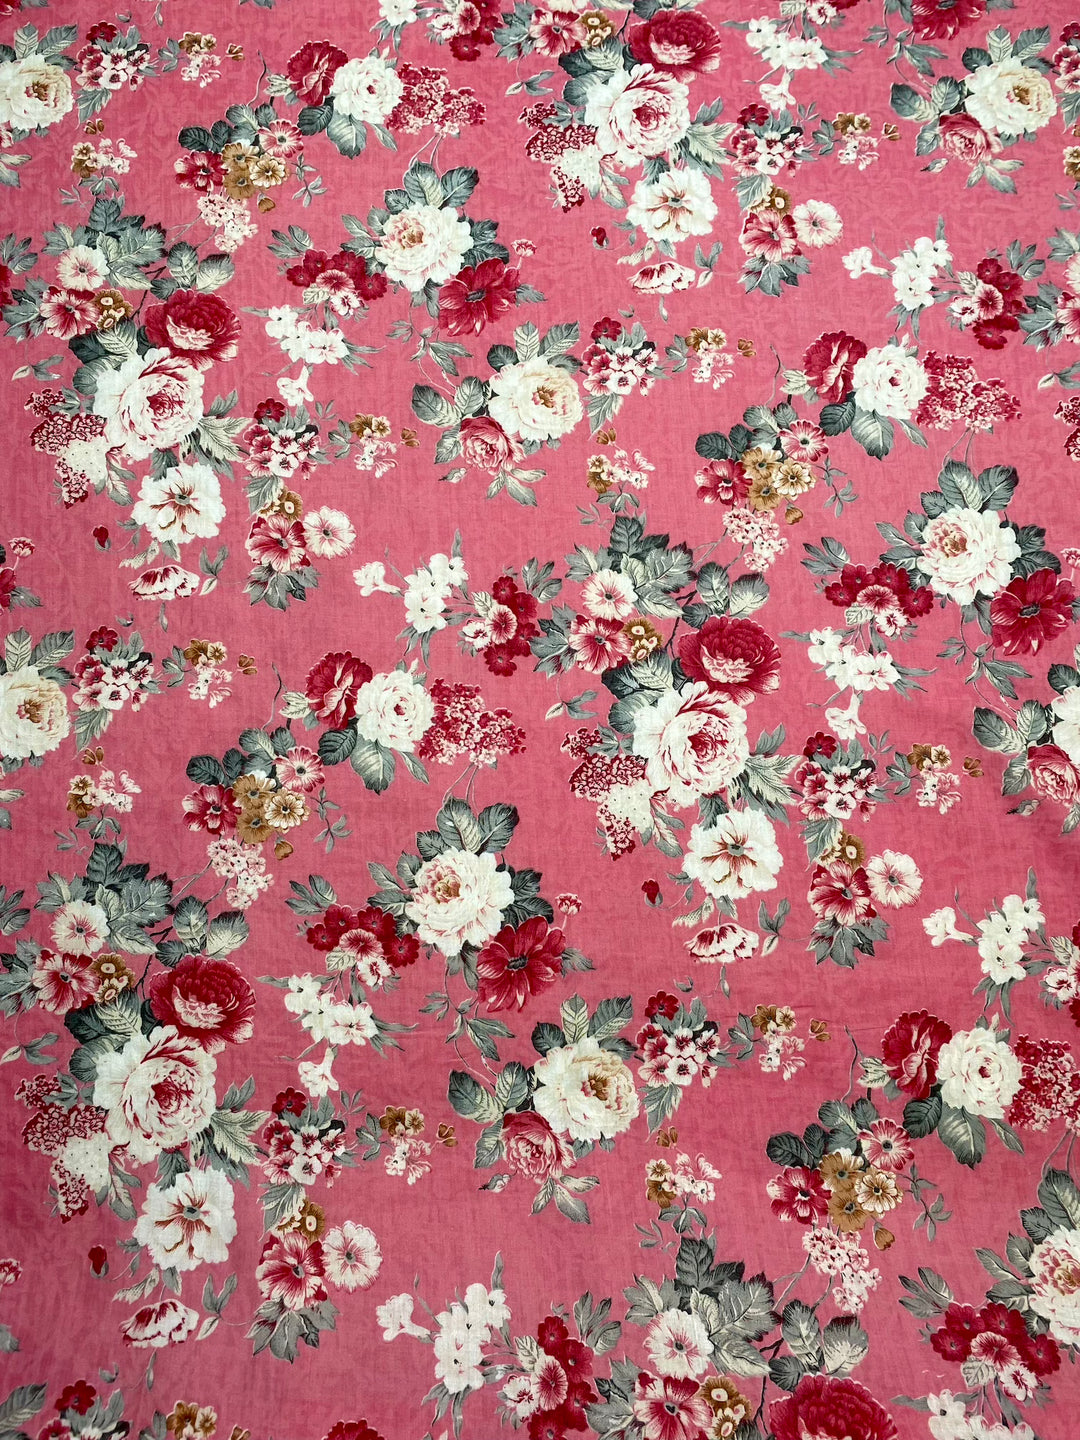 Printed Floral Cotton Fabric Pink